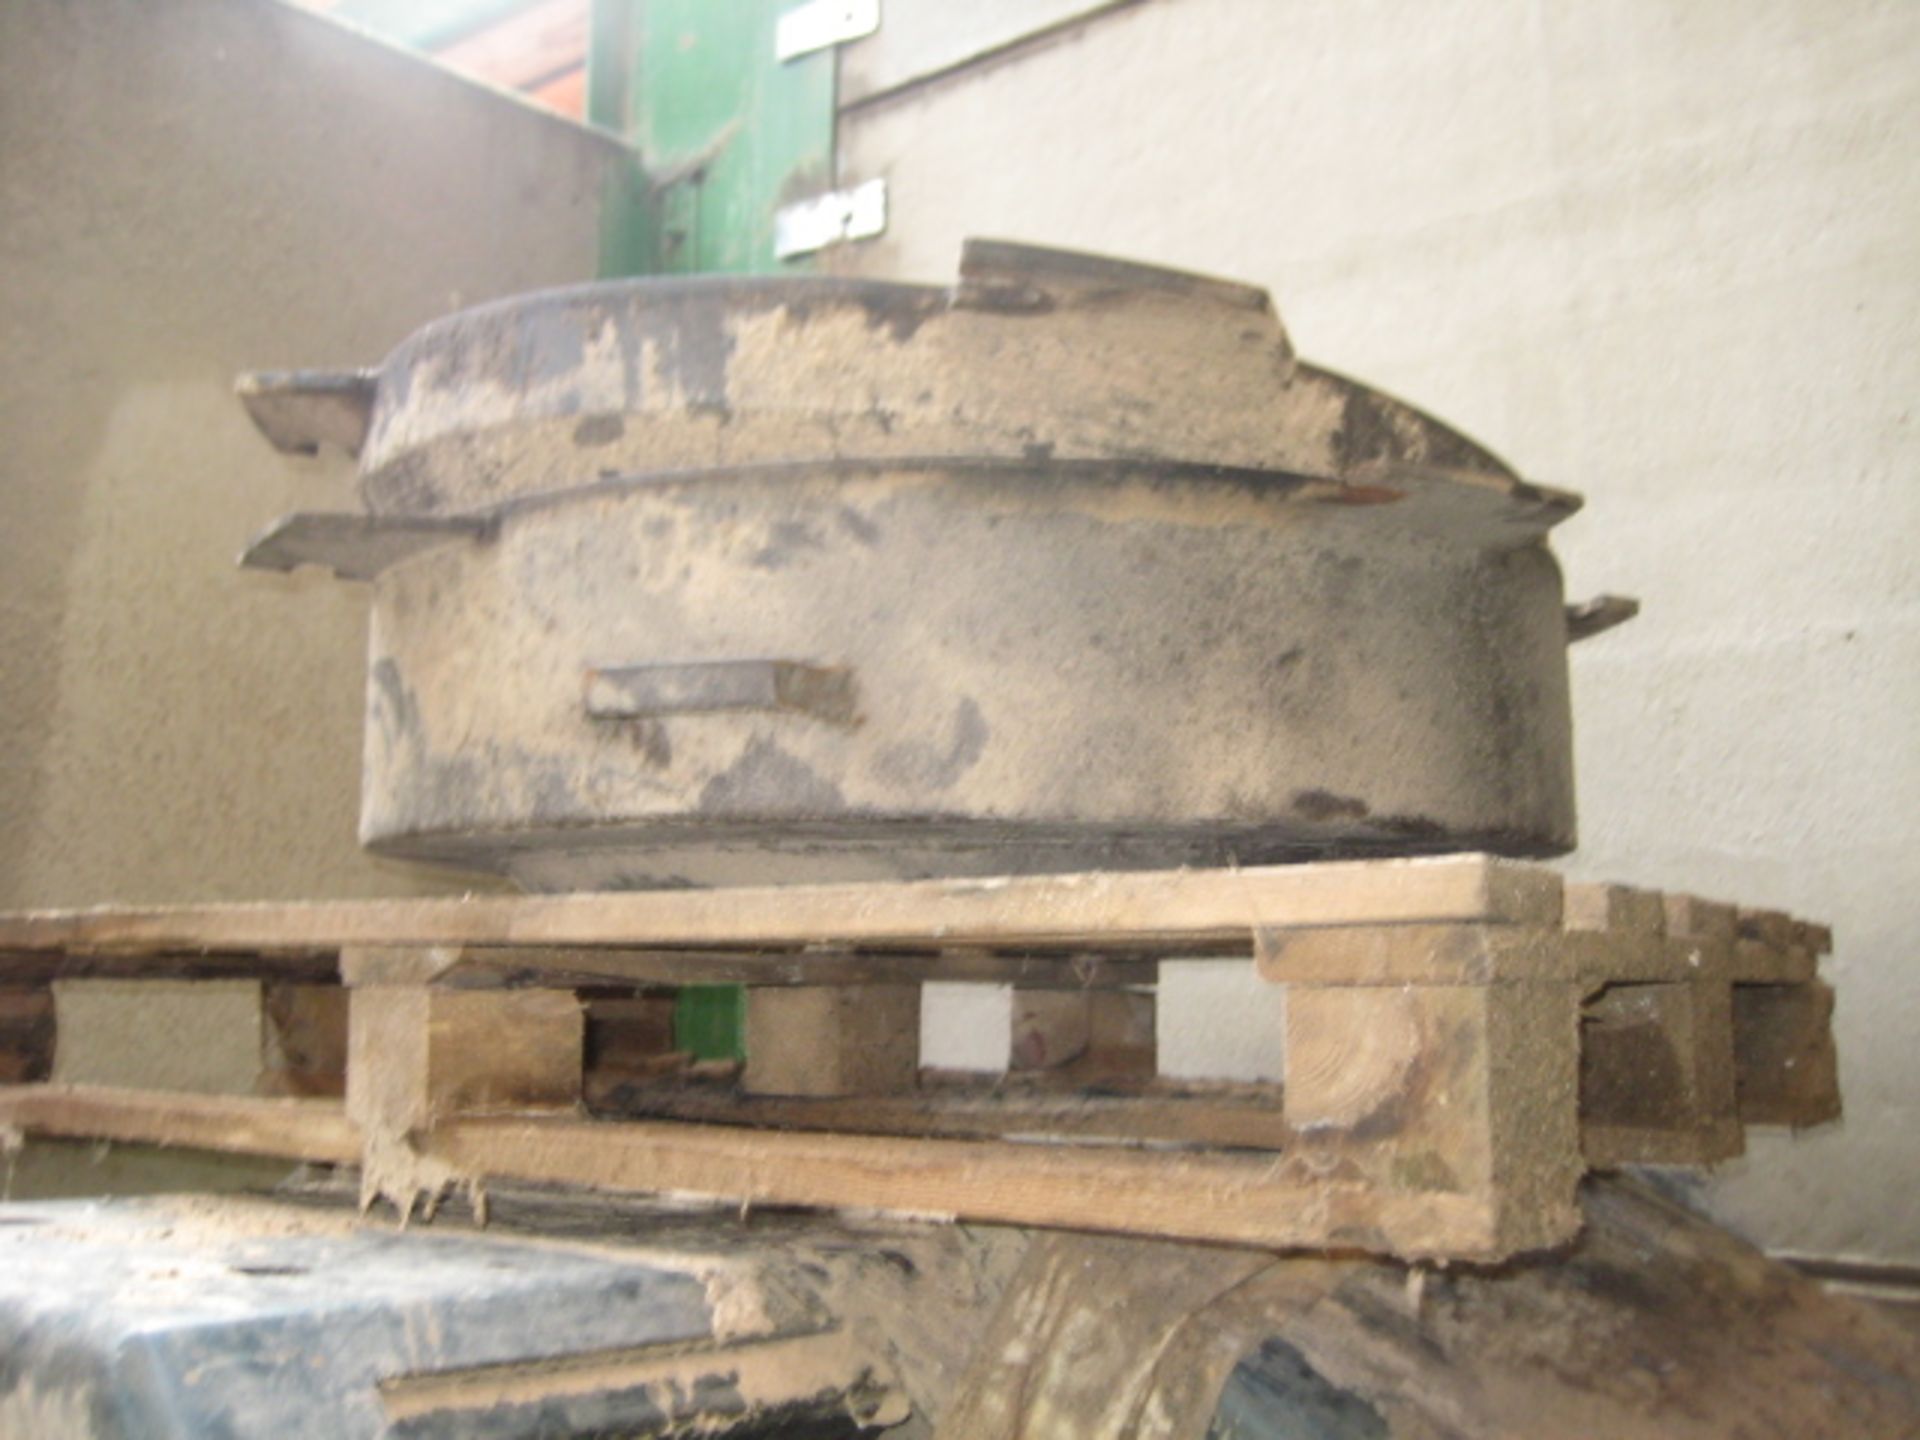 Paladin 1200WP Pellet Press Body, with internal gears and pulleys (no front work or rear equipment). - Image 6 of 8